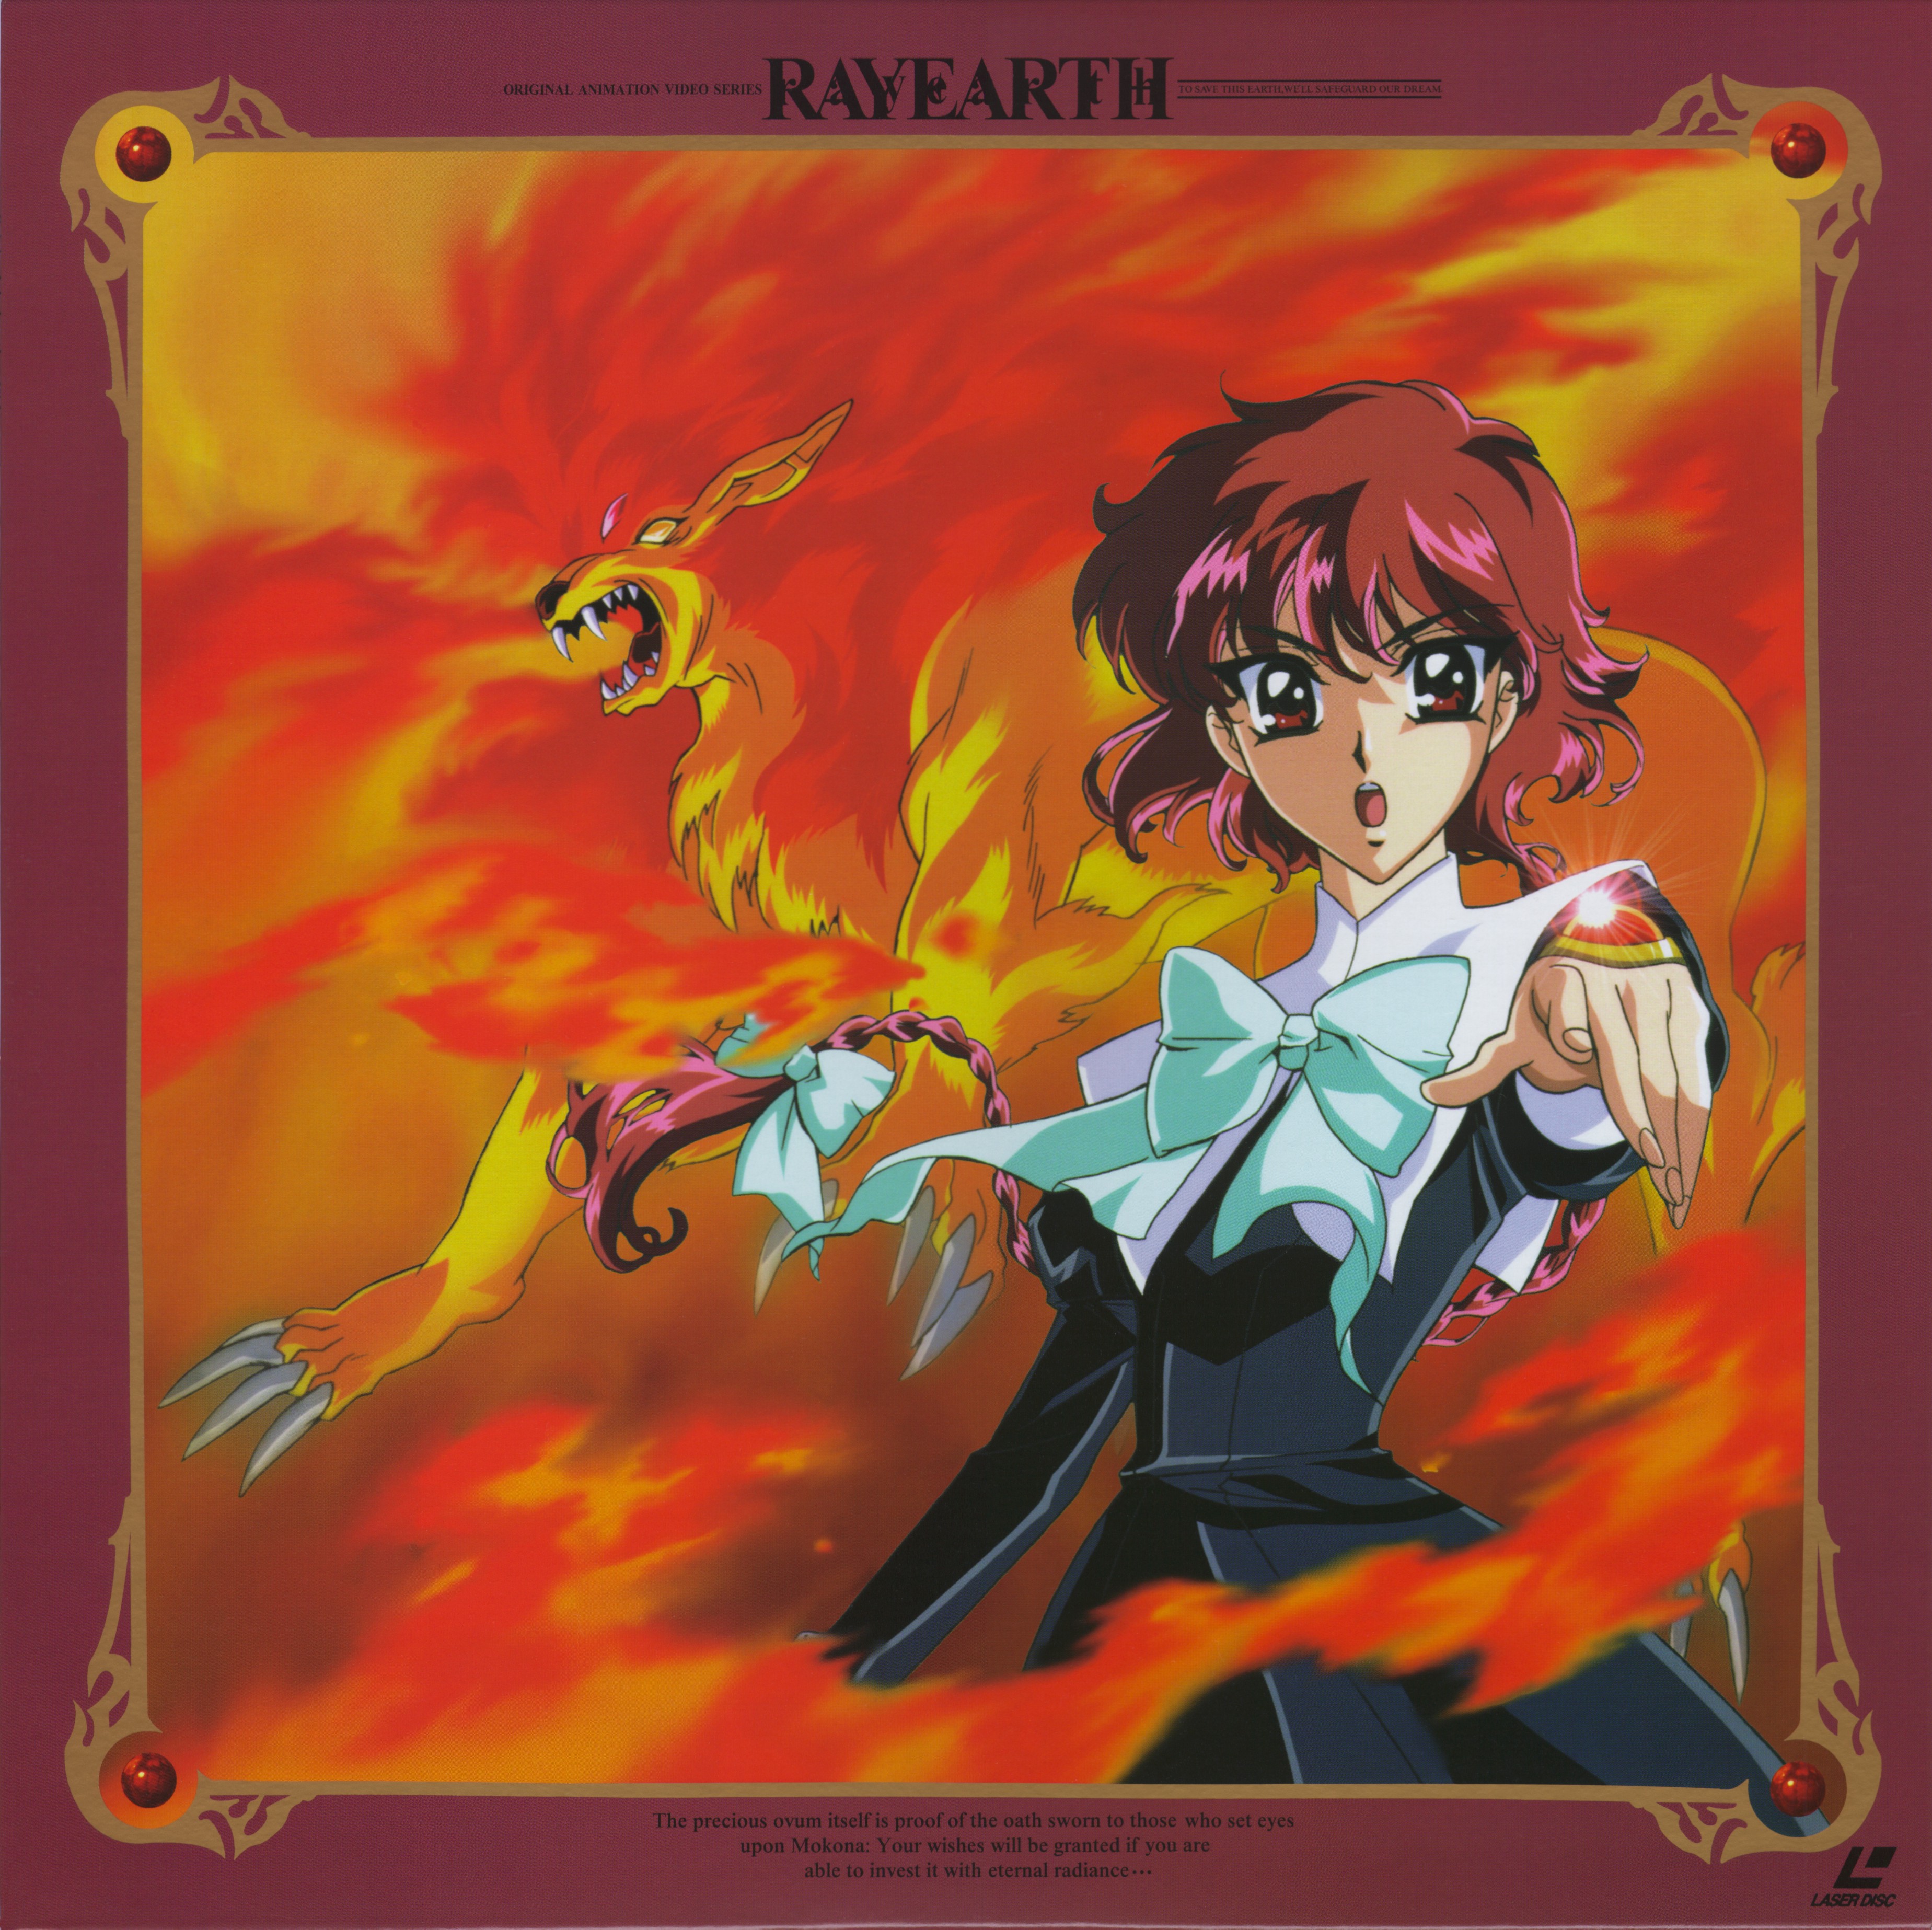 Download High-Quality Magic Knight Rayearth Image